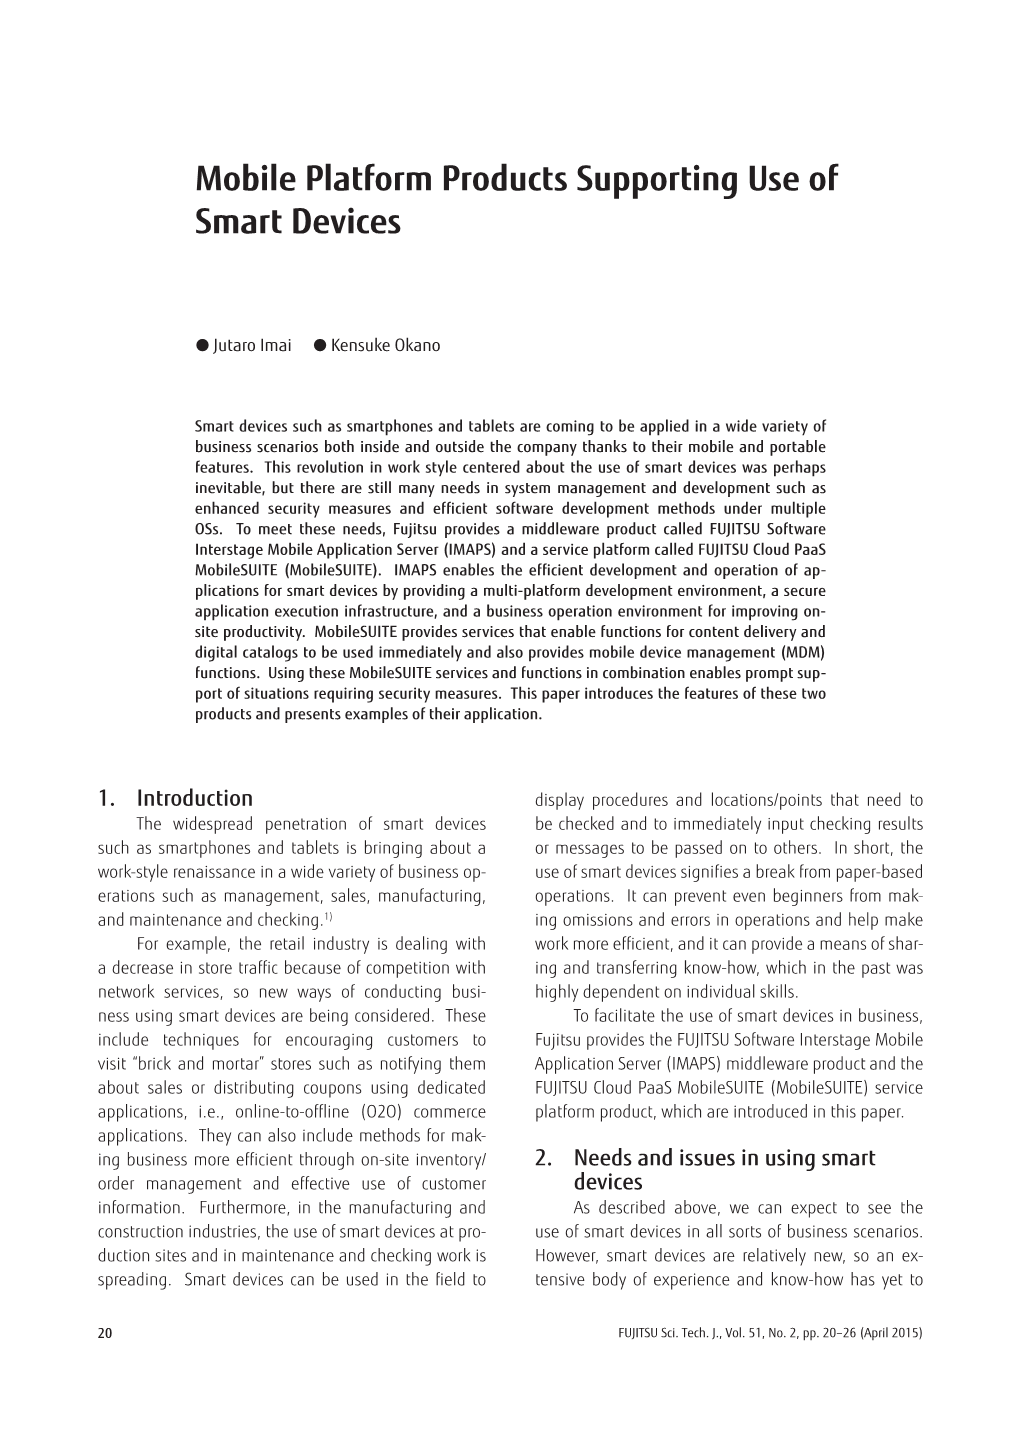 Mobile Platform Products Supporting Use of Smart Devices